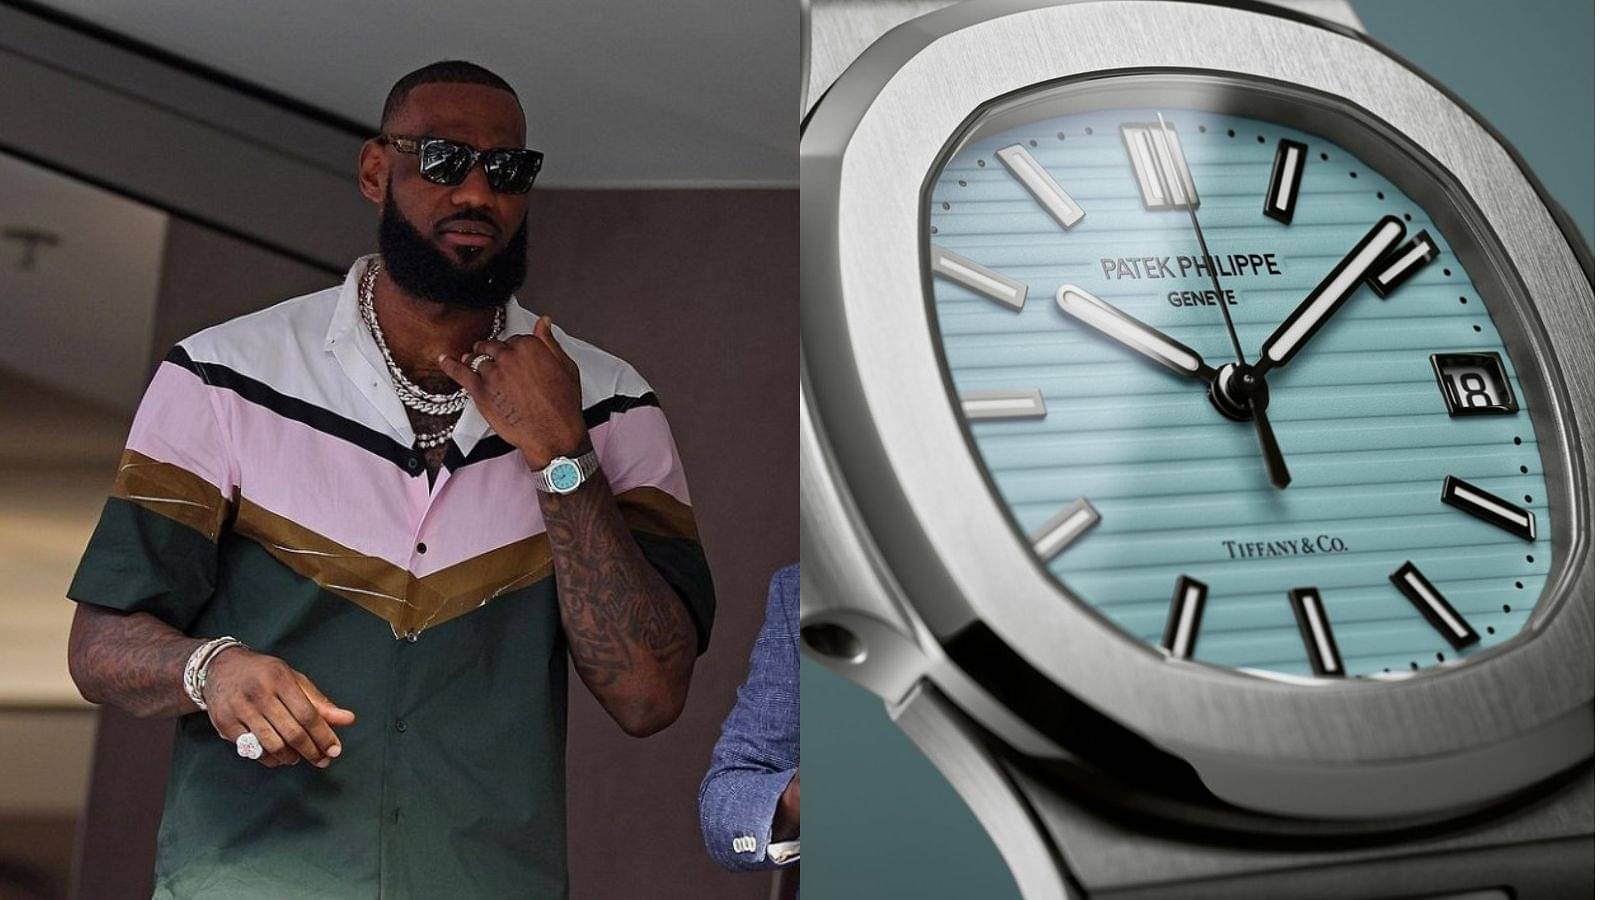 “LeBron James owns an insanely rare $6.5 million Tiffany-Patek collaboration watch”: Lakers star who recently became a billionaire, has a timepiece that only 170 people own